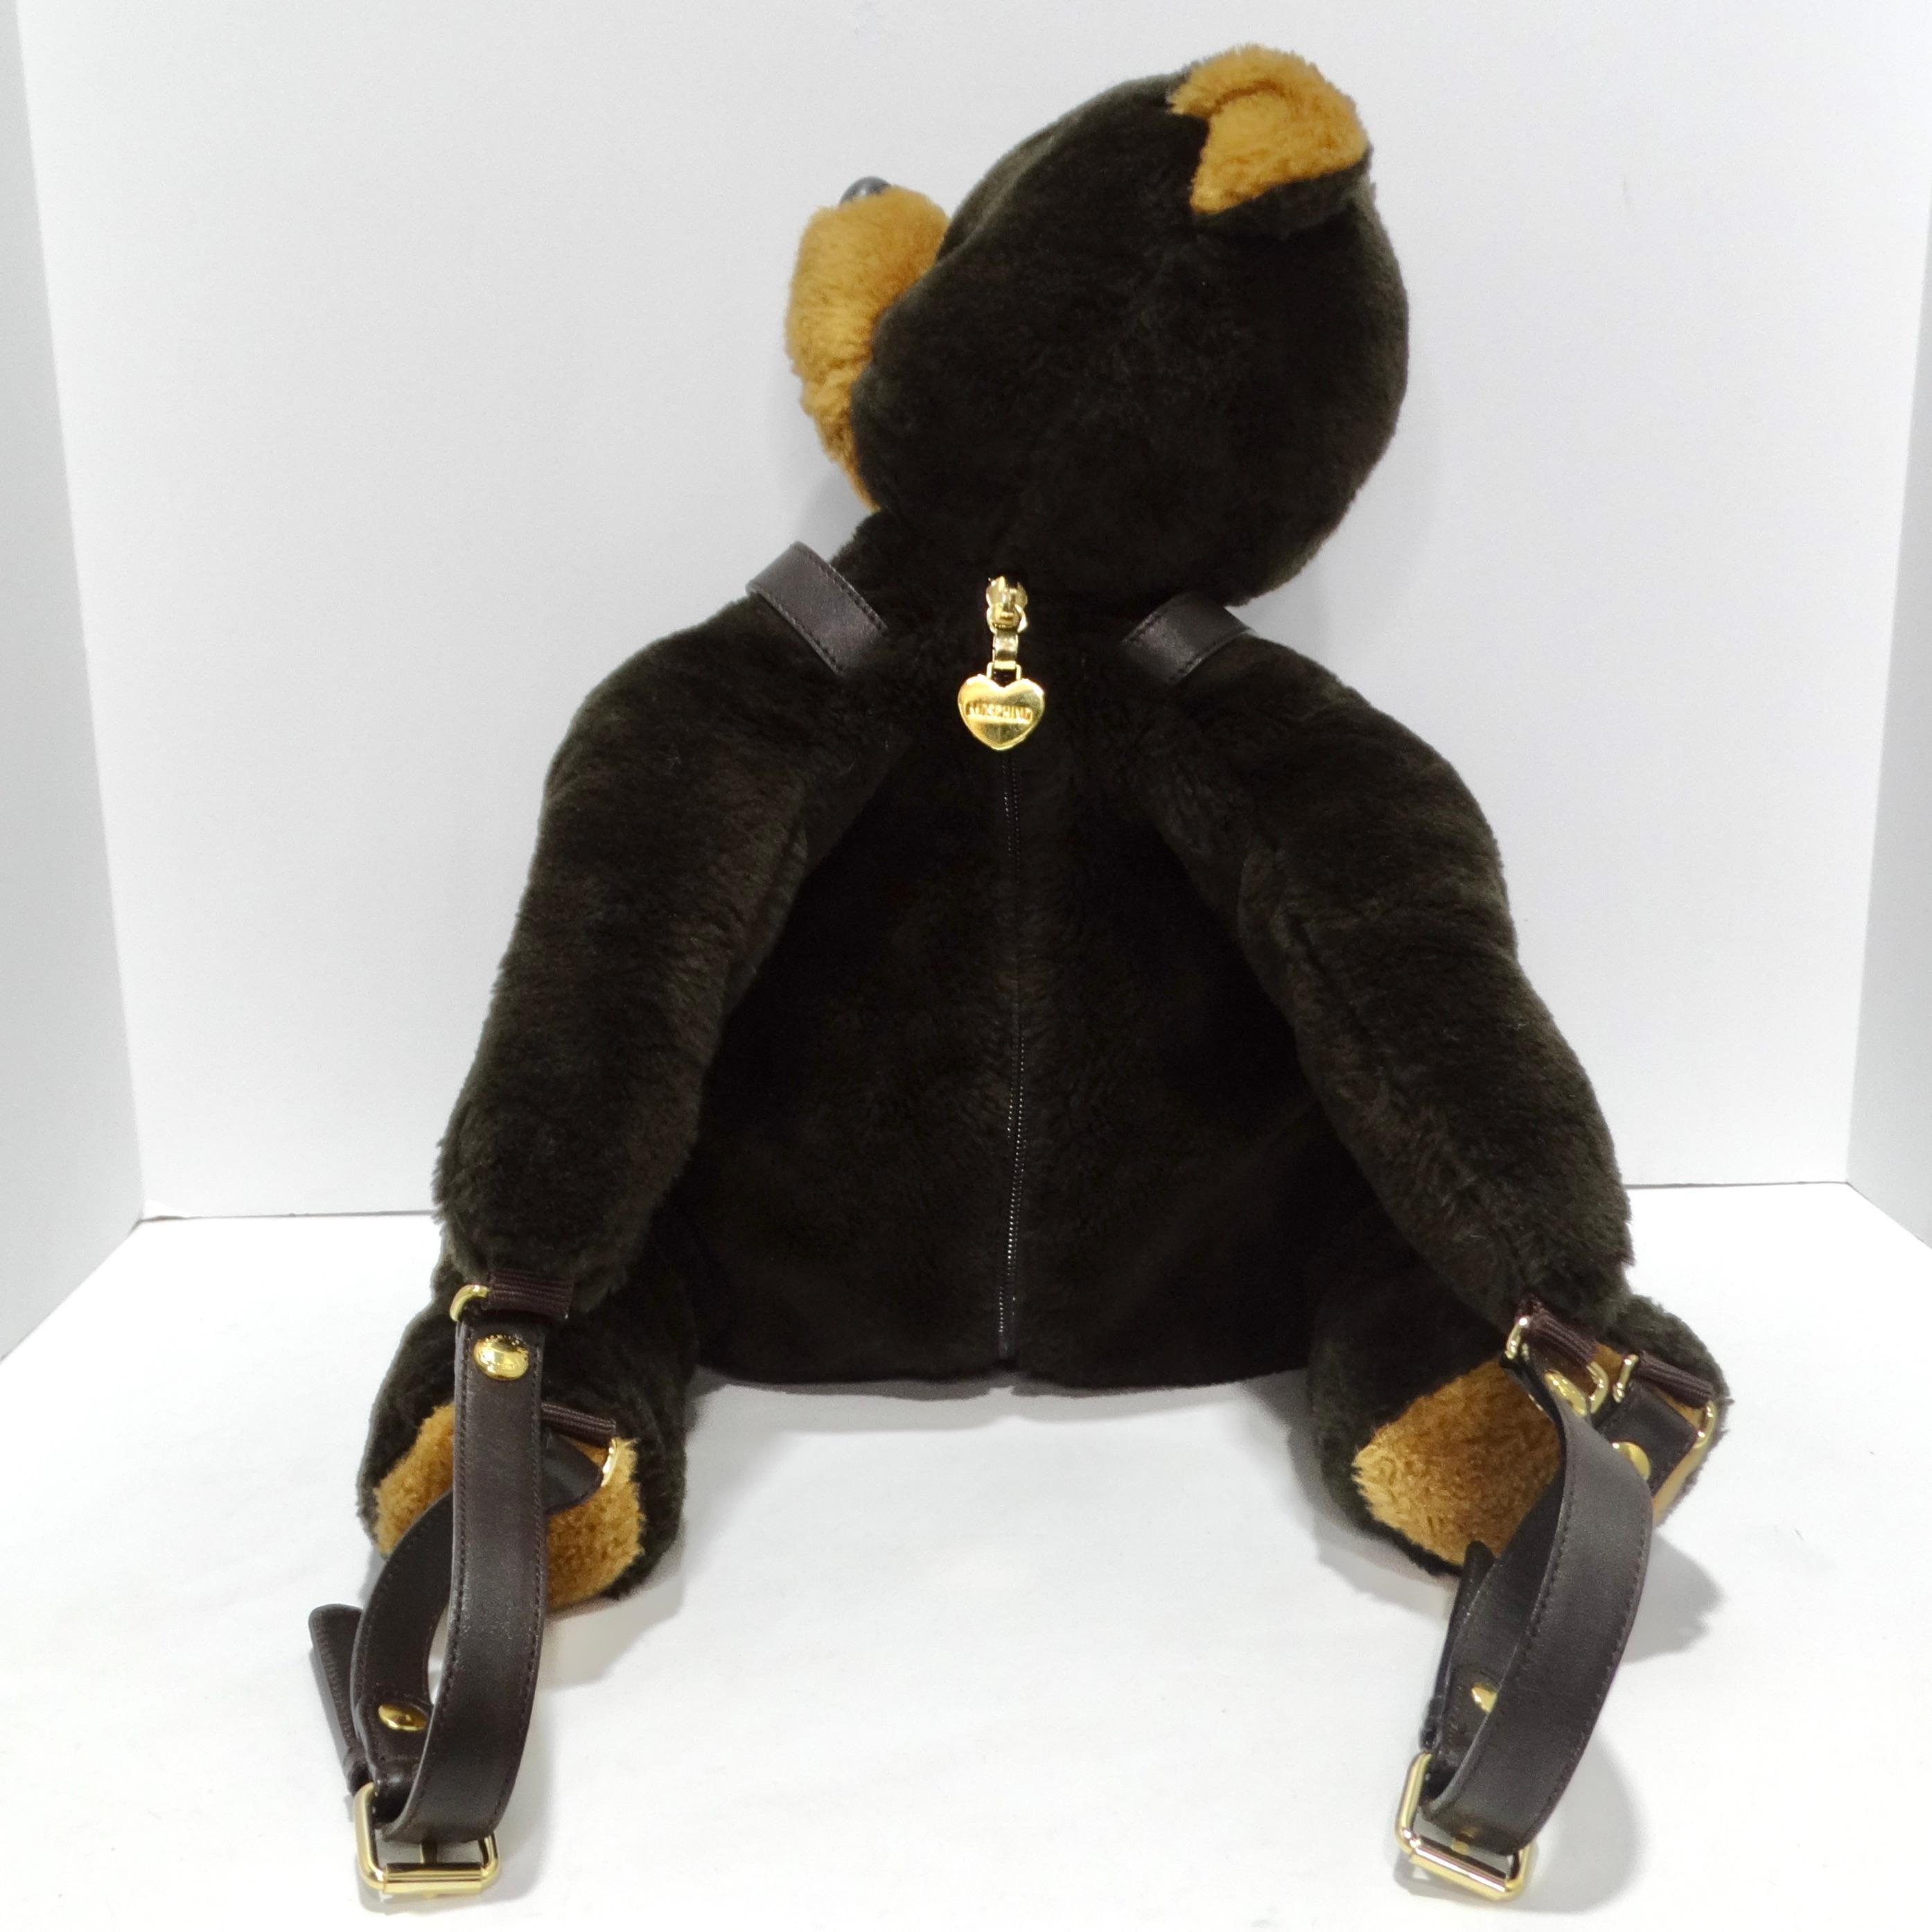 Moschino Redwall 1990s Teddy Bear Backpack In Excellent Condition For Sale In Scottsdale, AZ